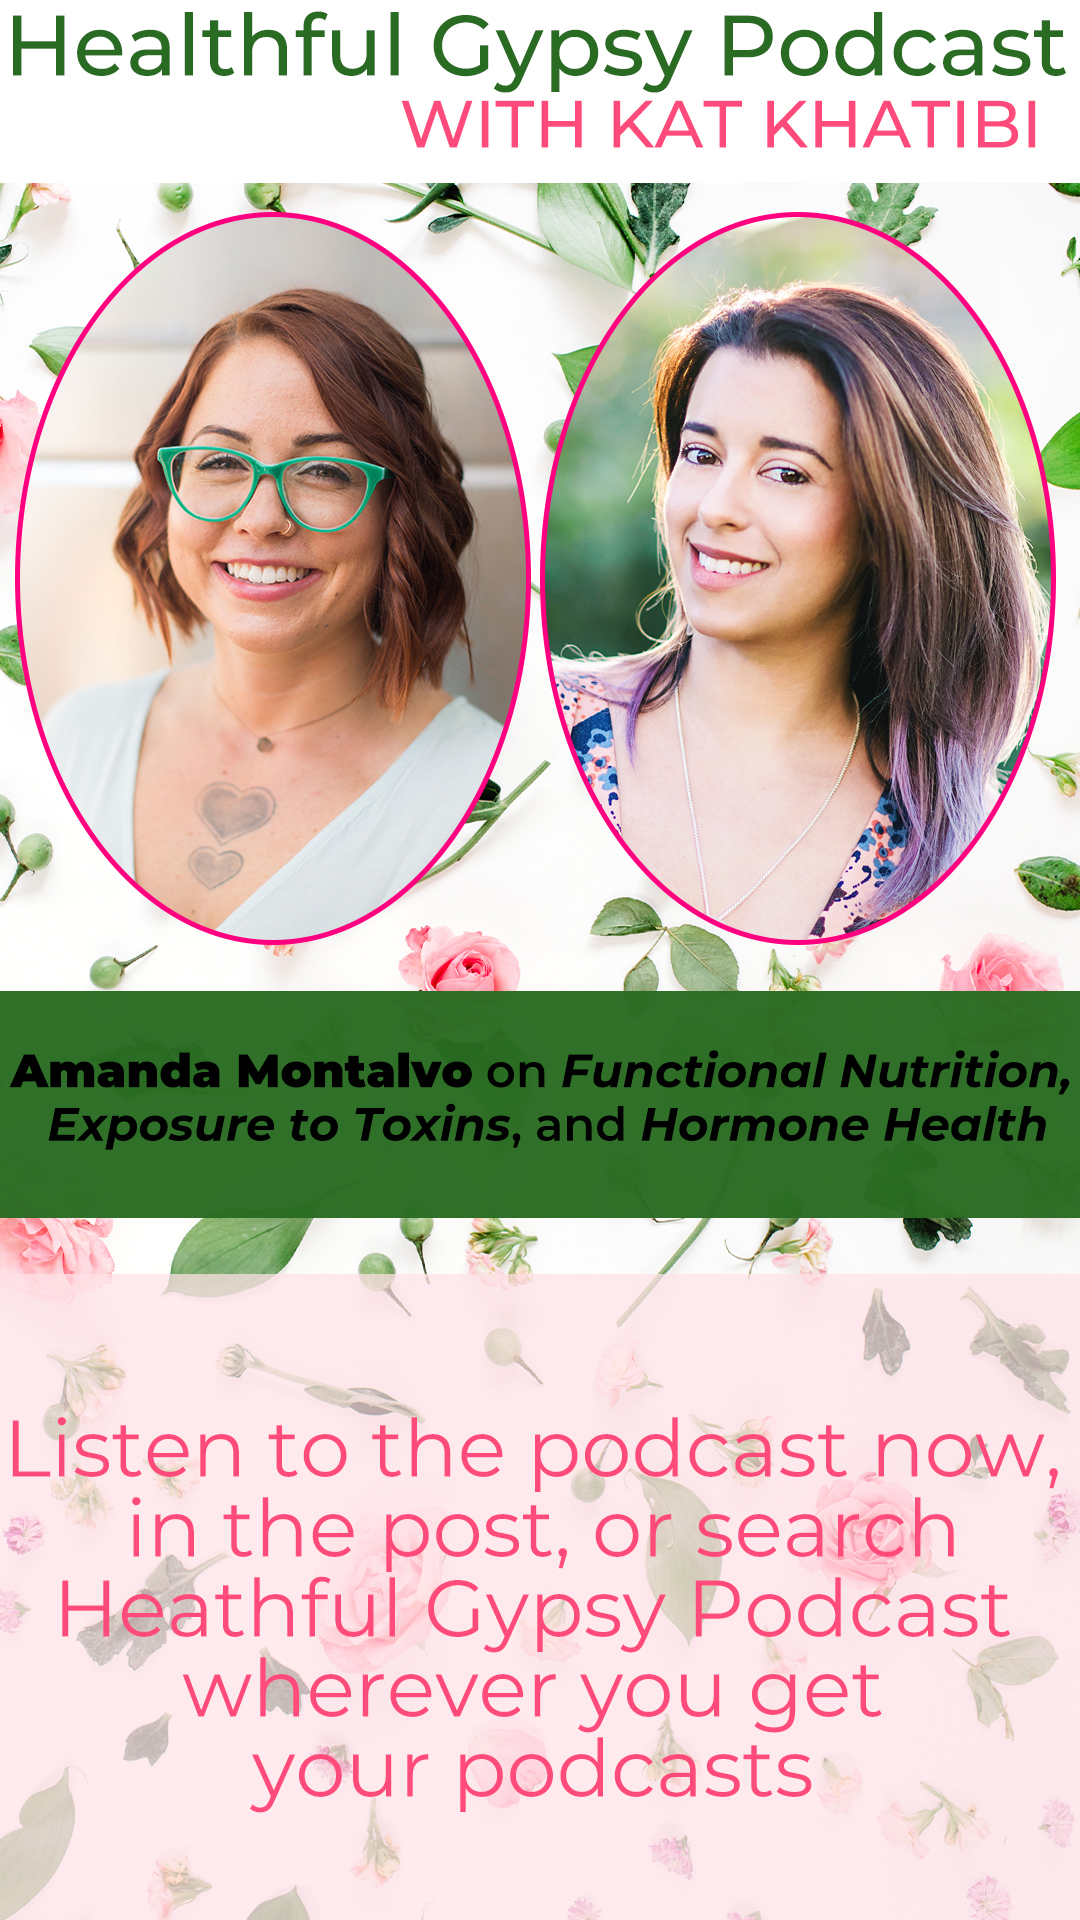 Amanda Montalvo on Functional Nutrition, Exposure to Toxins, and Hormone Health